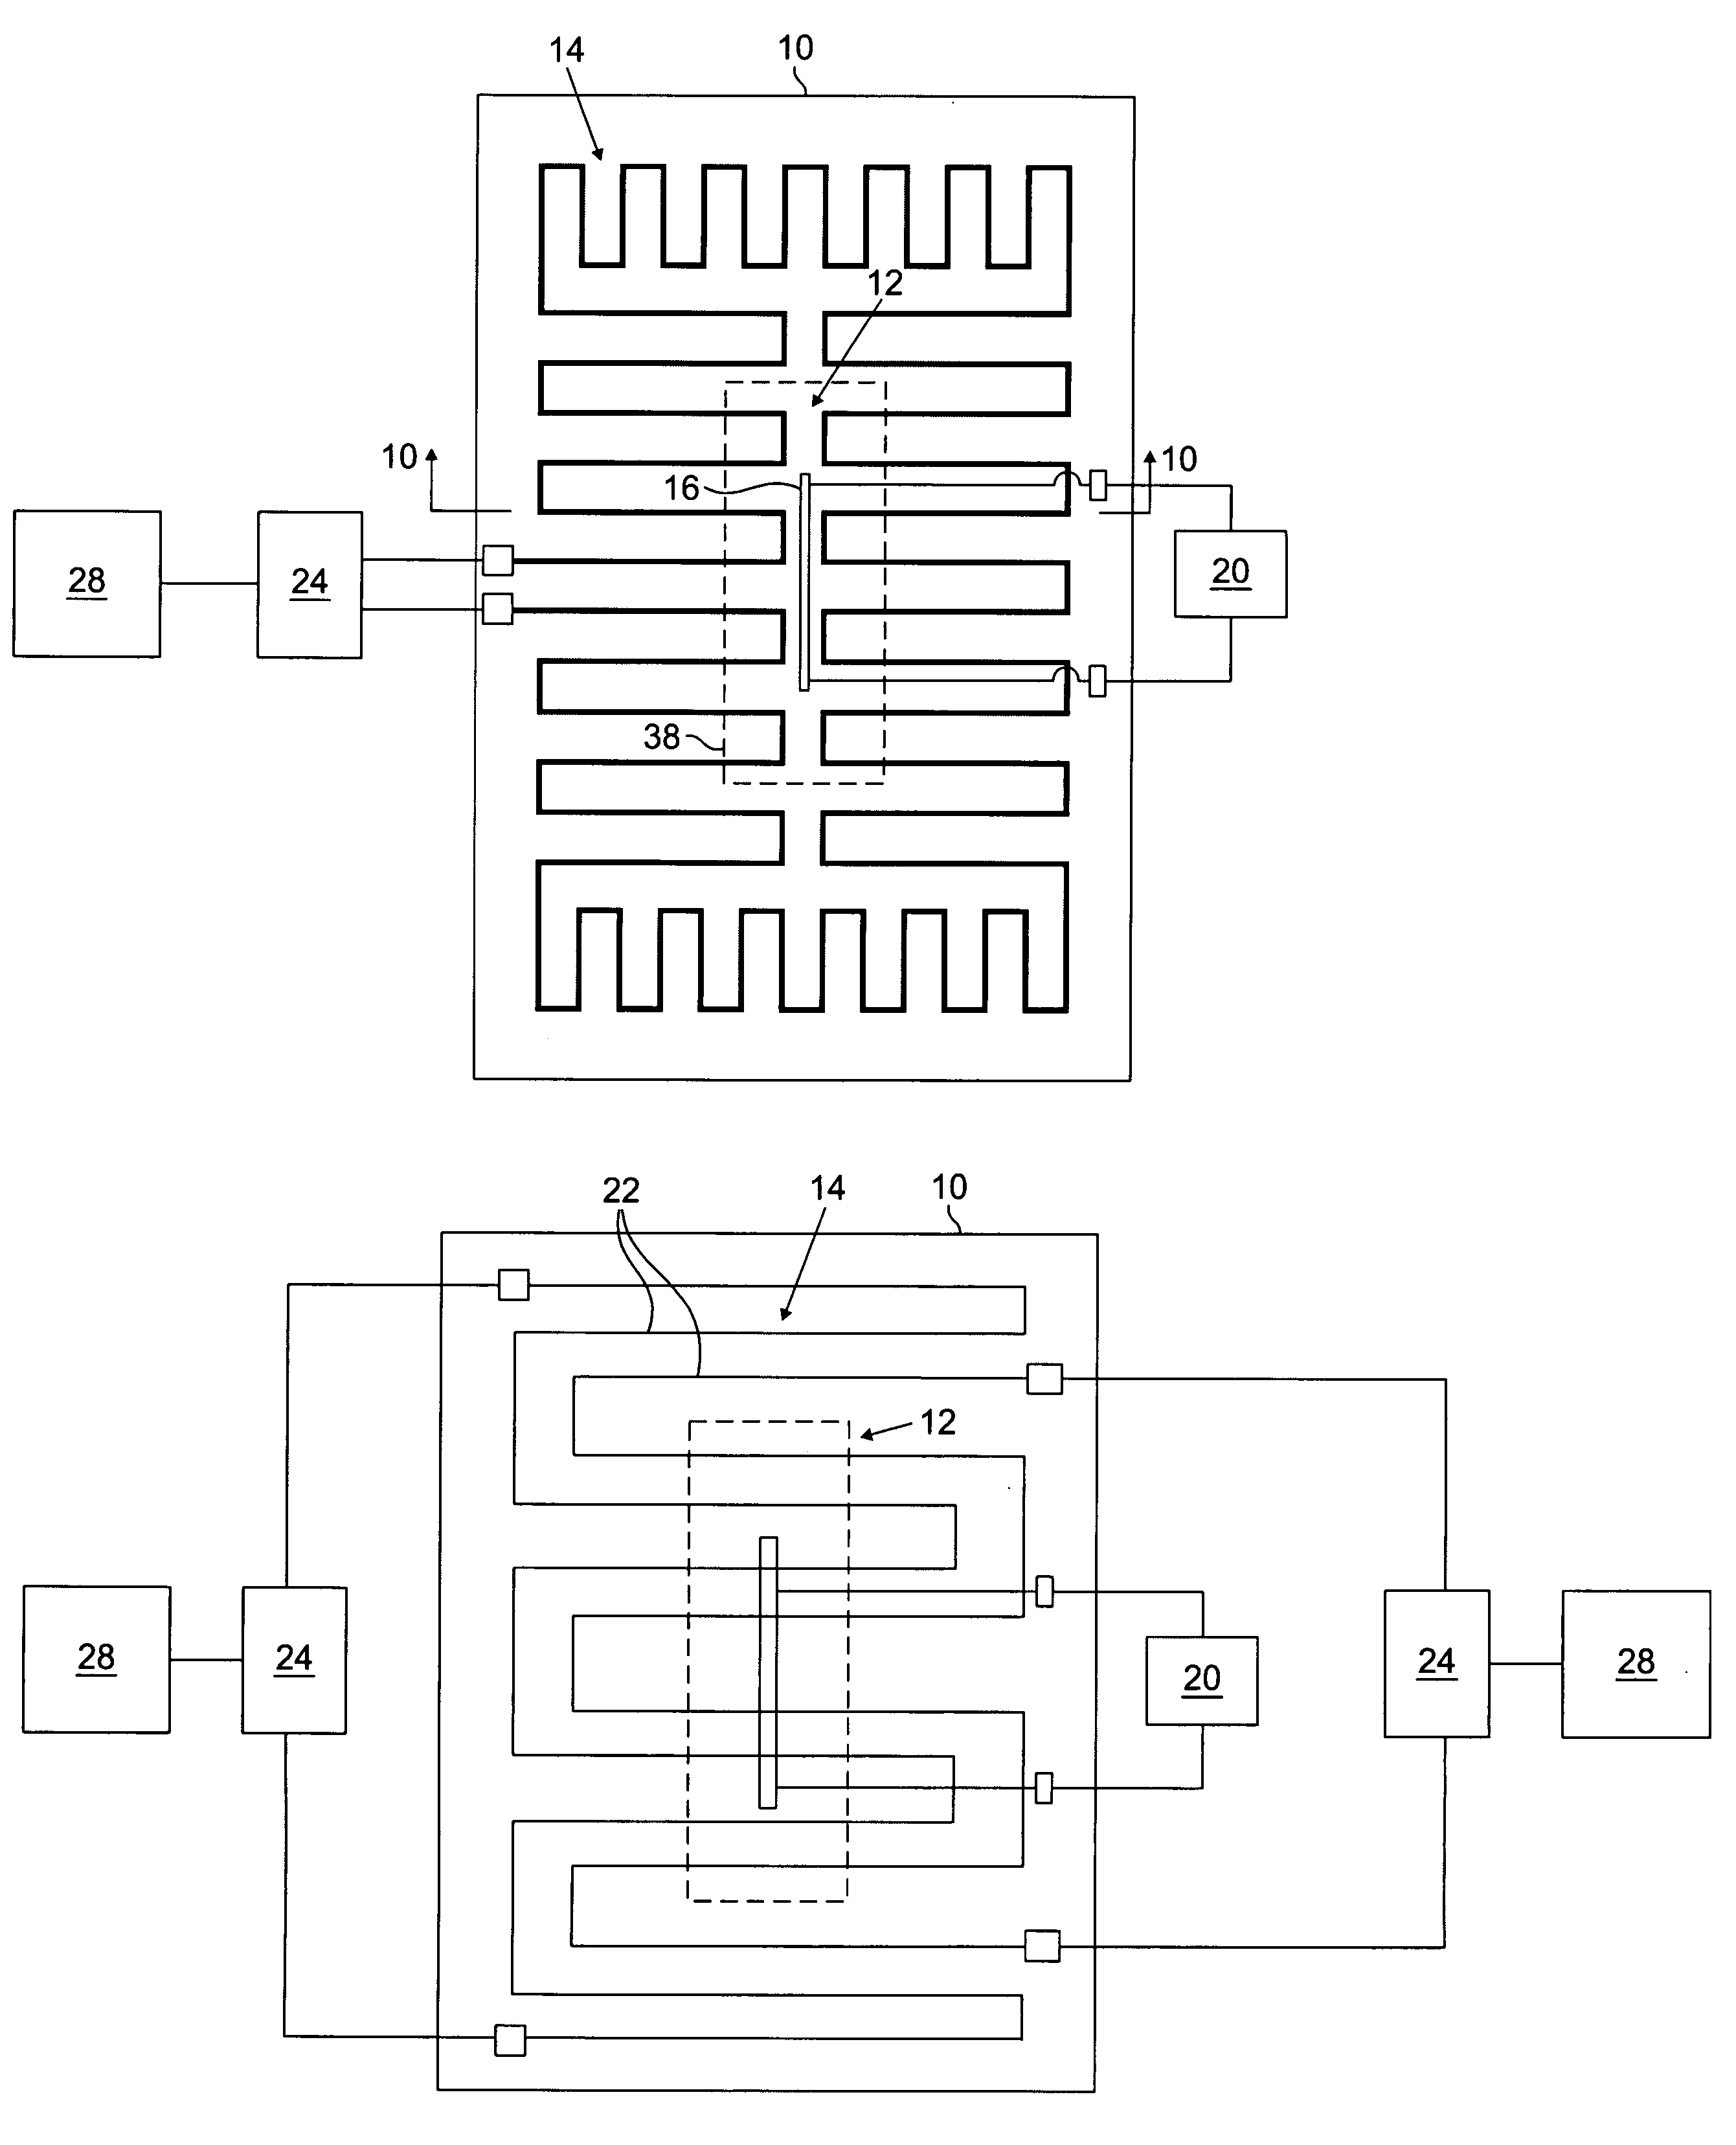 Semiconductor test device with heating circuit